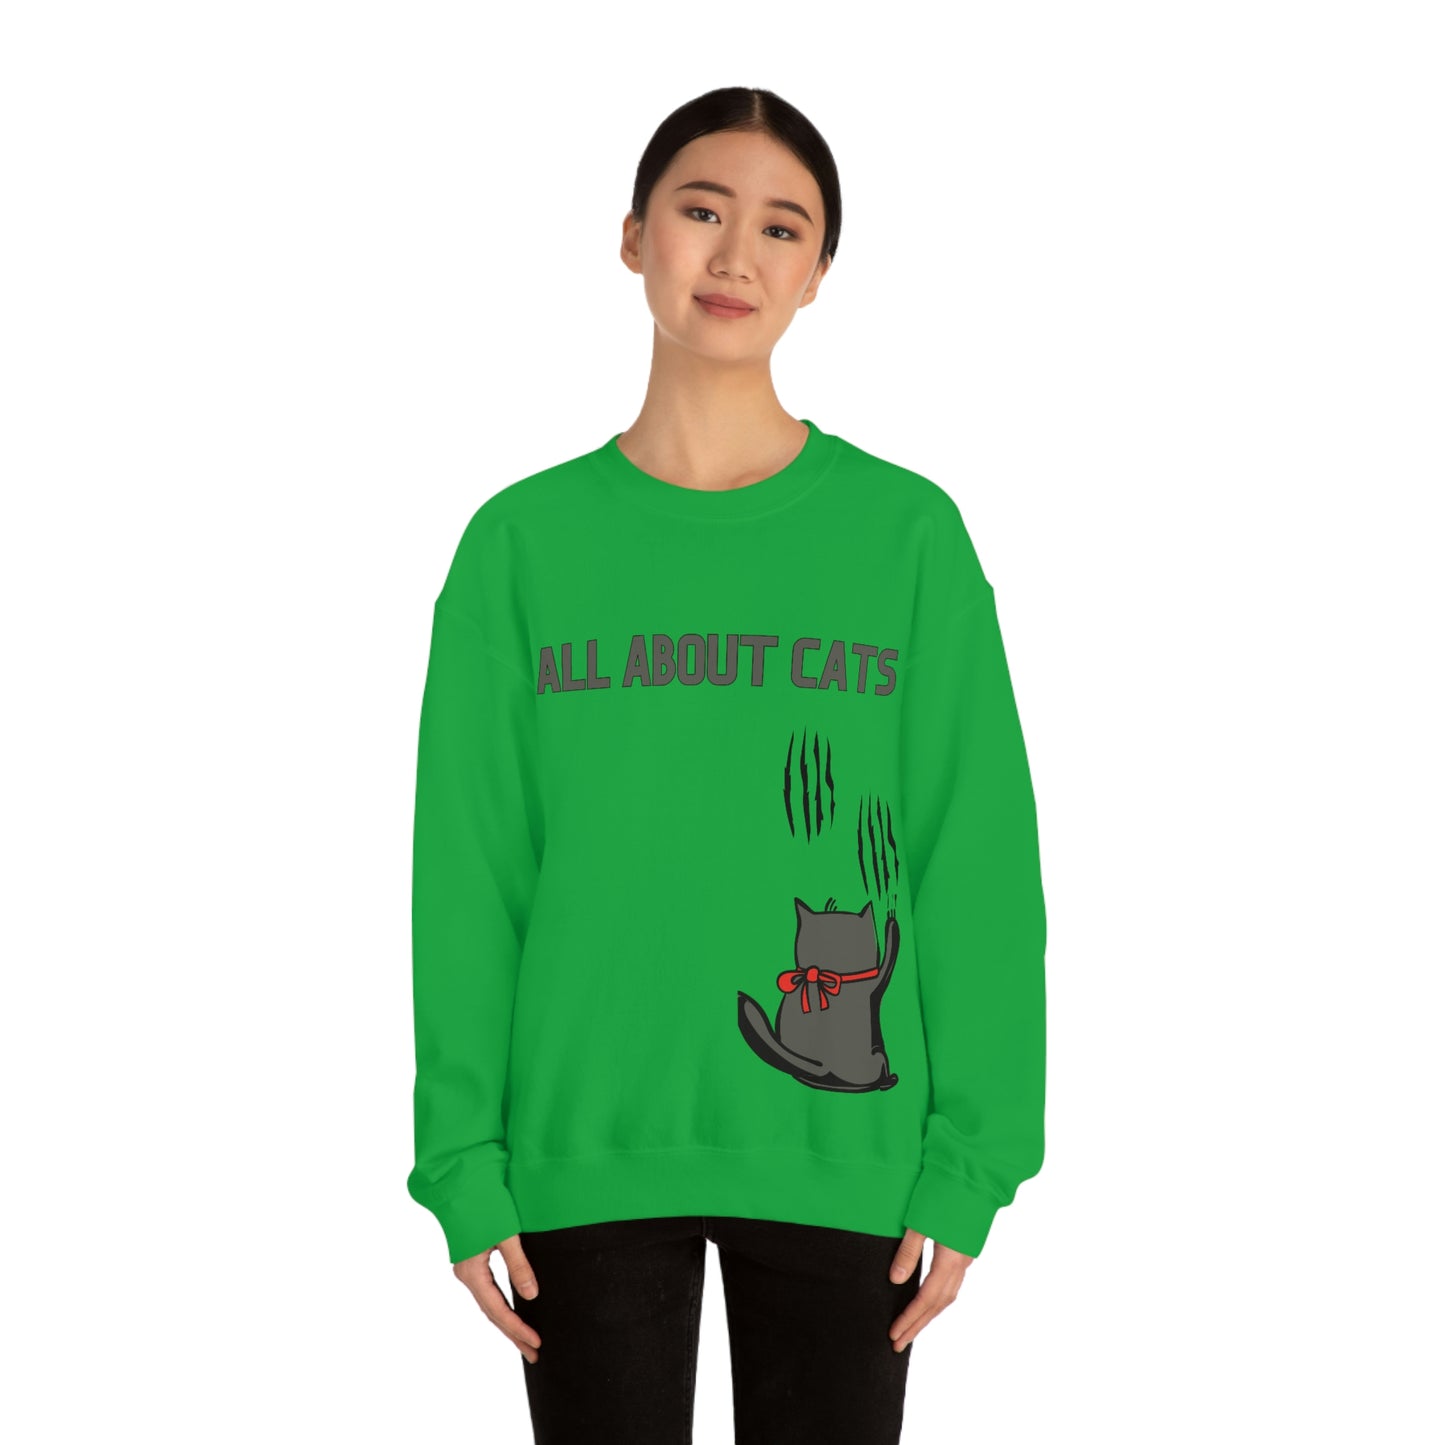 All About Cats Cat Scratches design Graphic Crewneck Sweatshirt